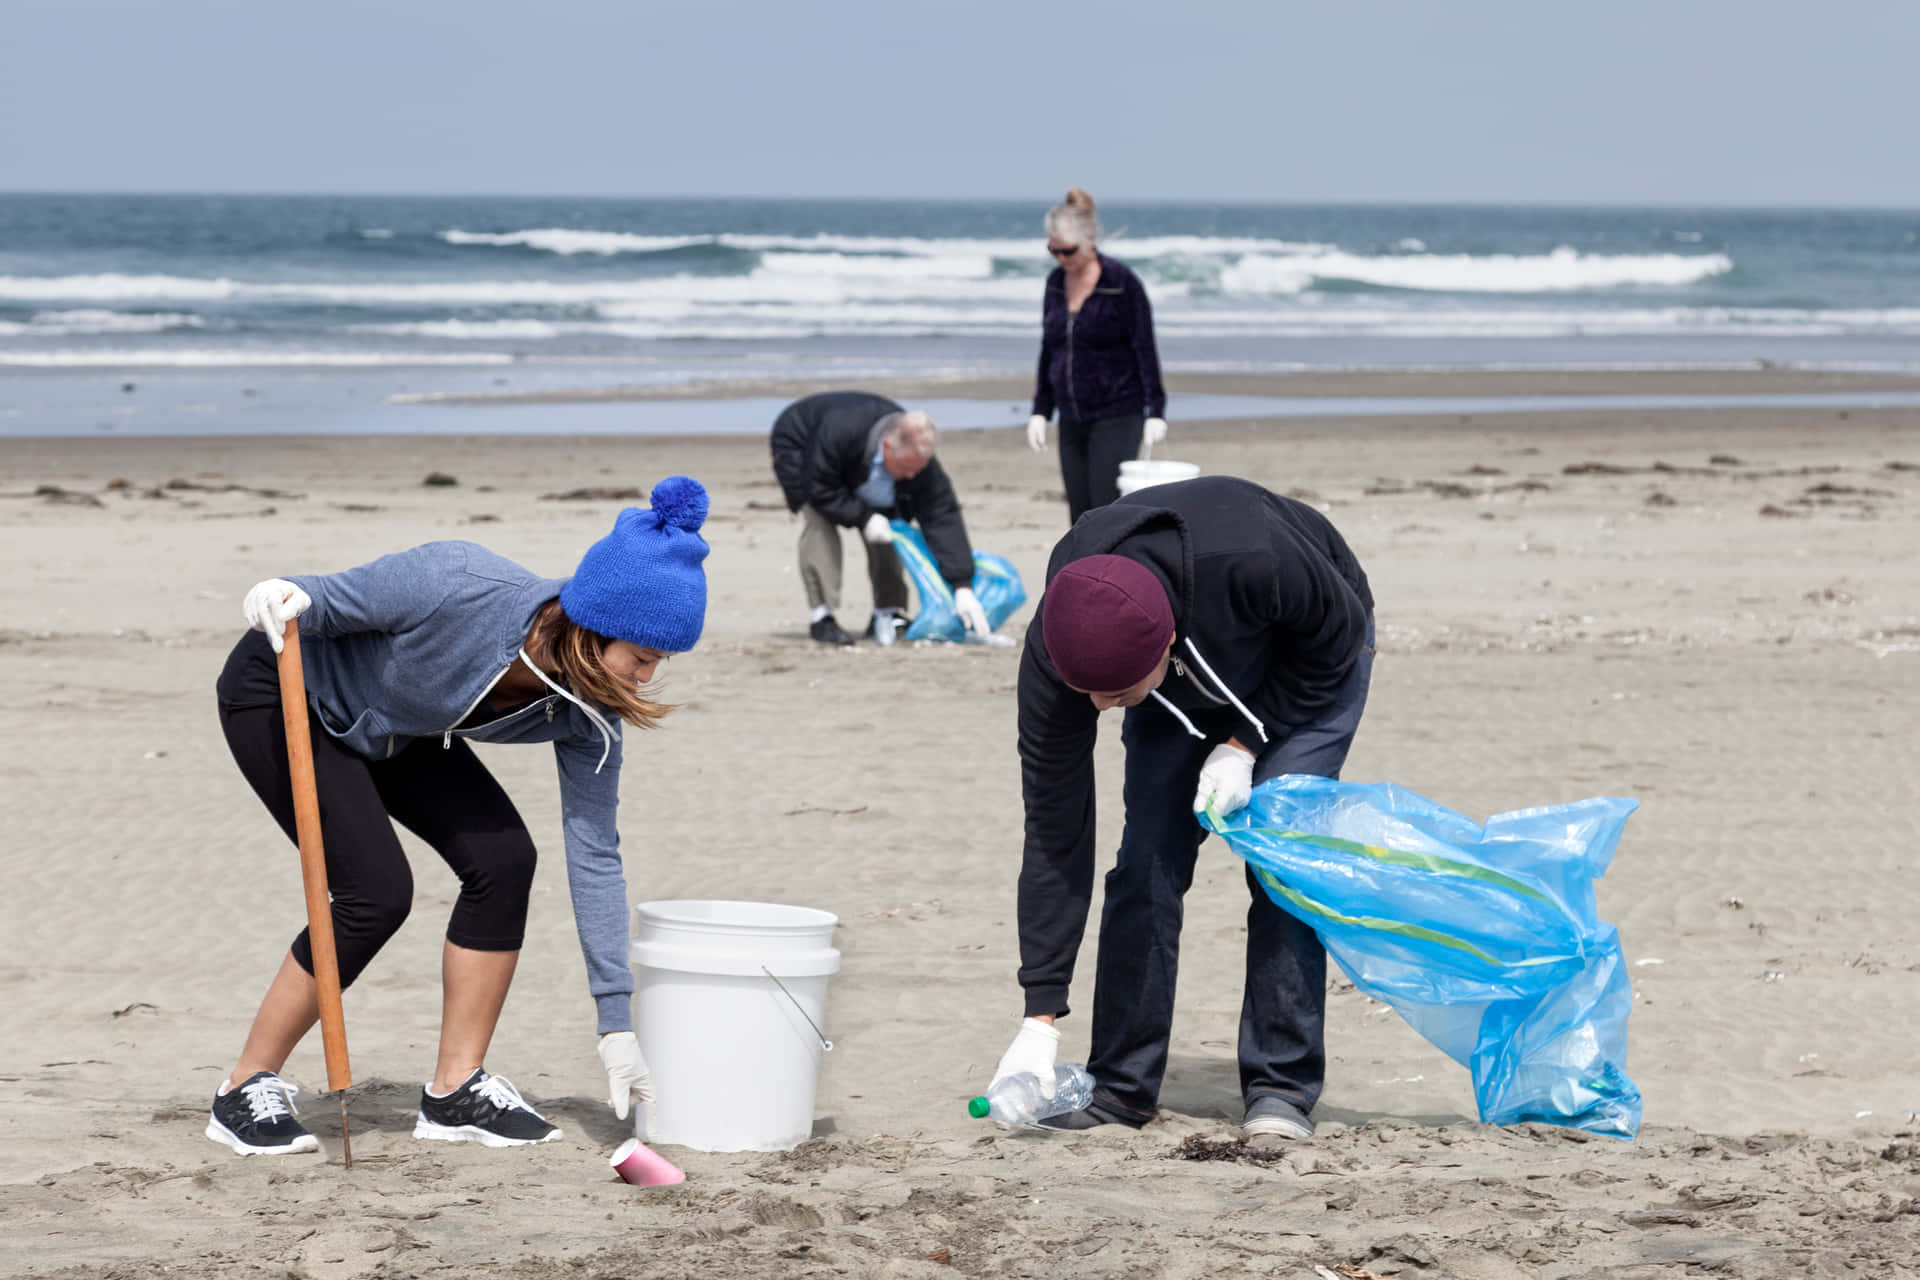 A Group Of People Cleaning Up The Beach